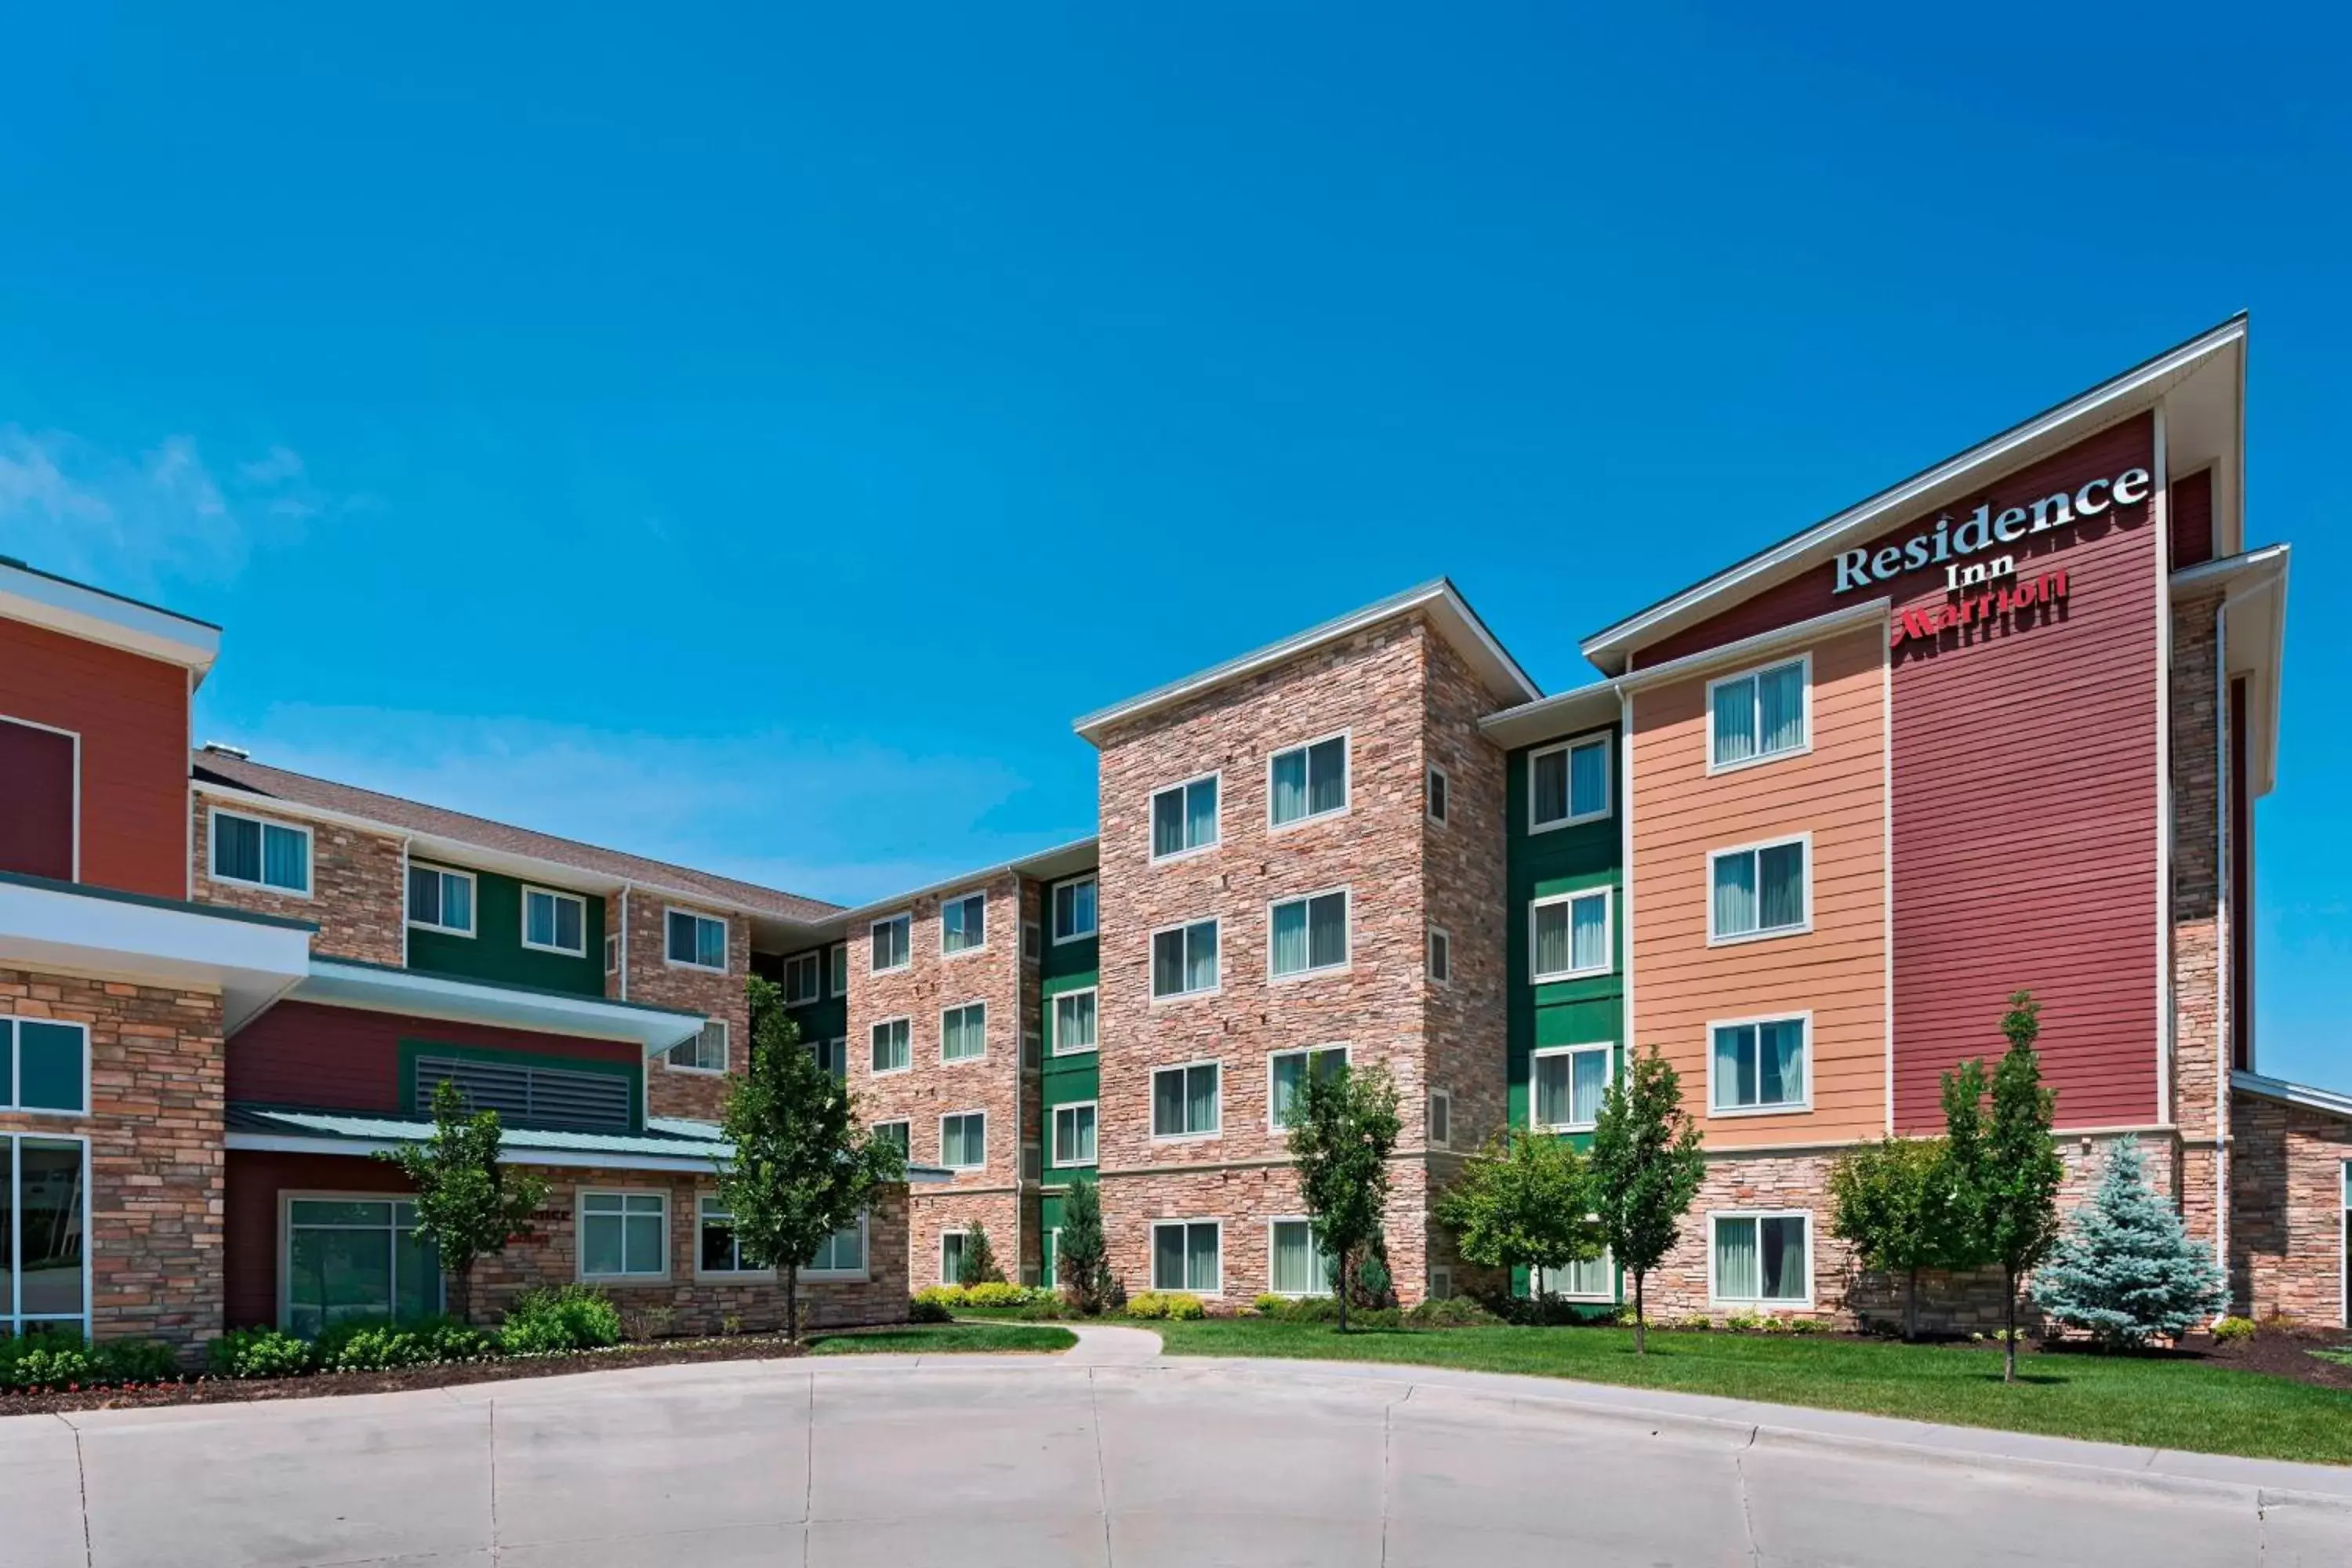 Property Building in Residence Inn by Marriott Omaha West